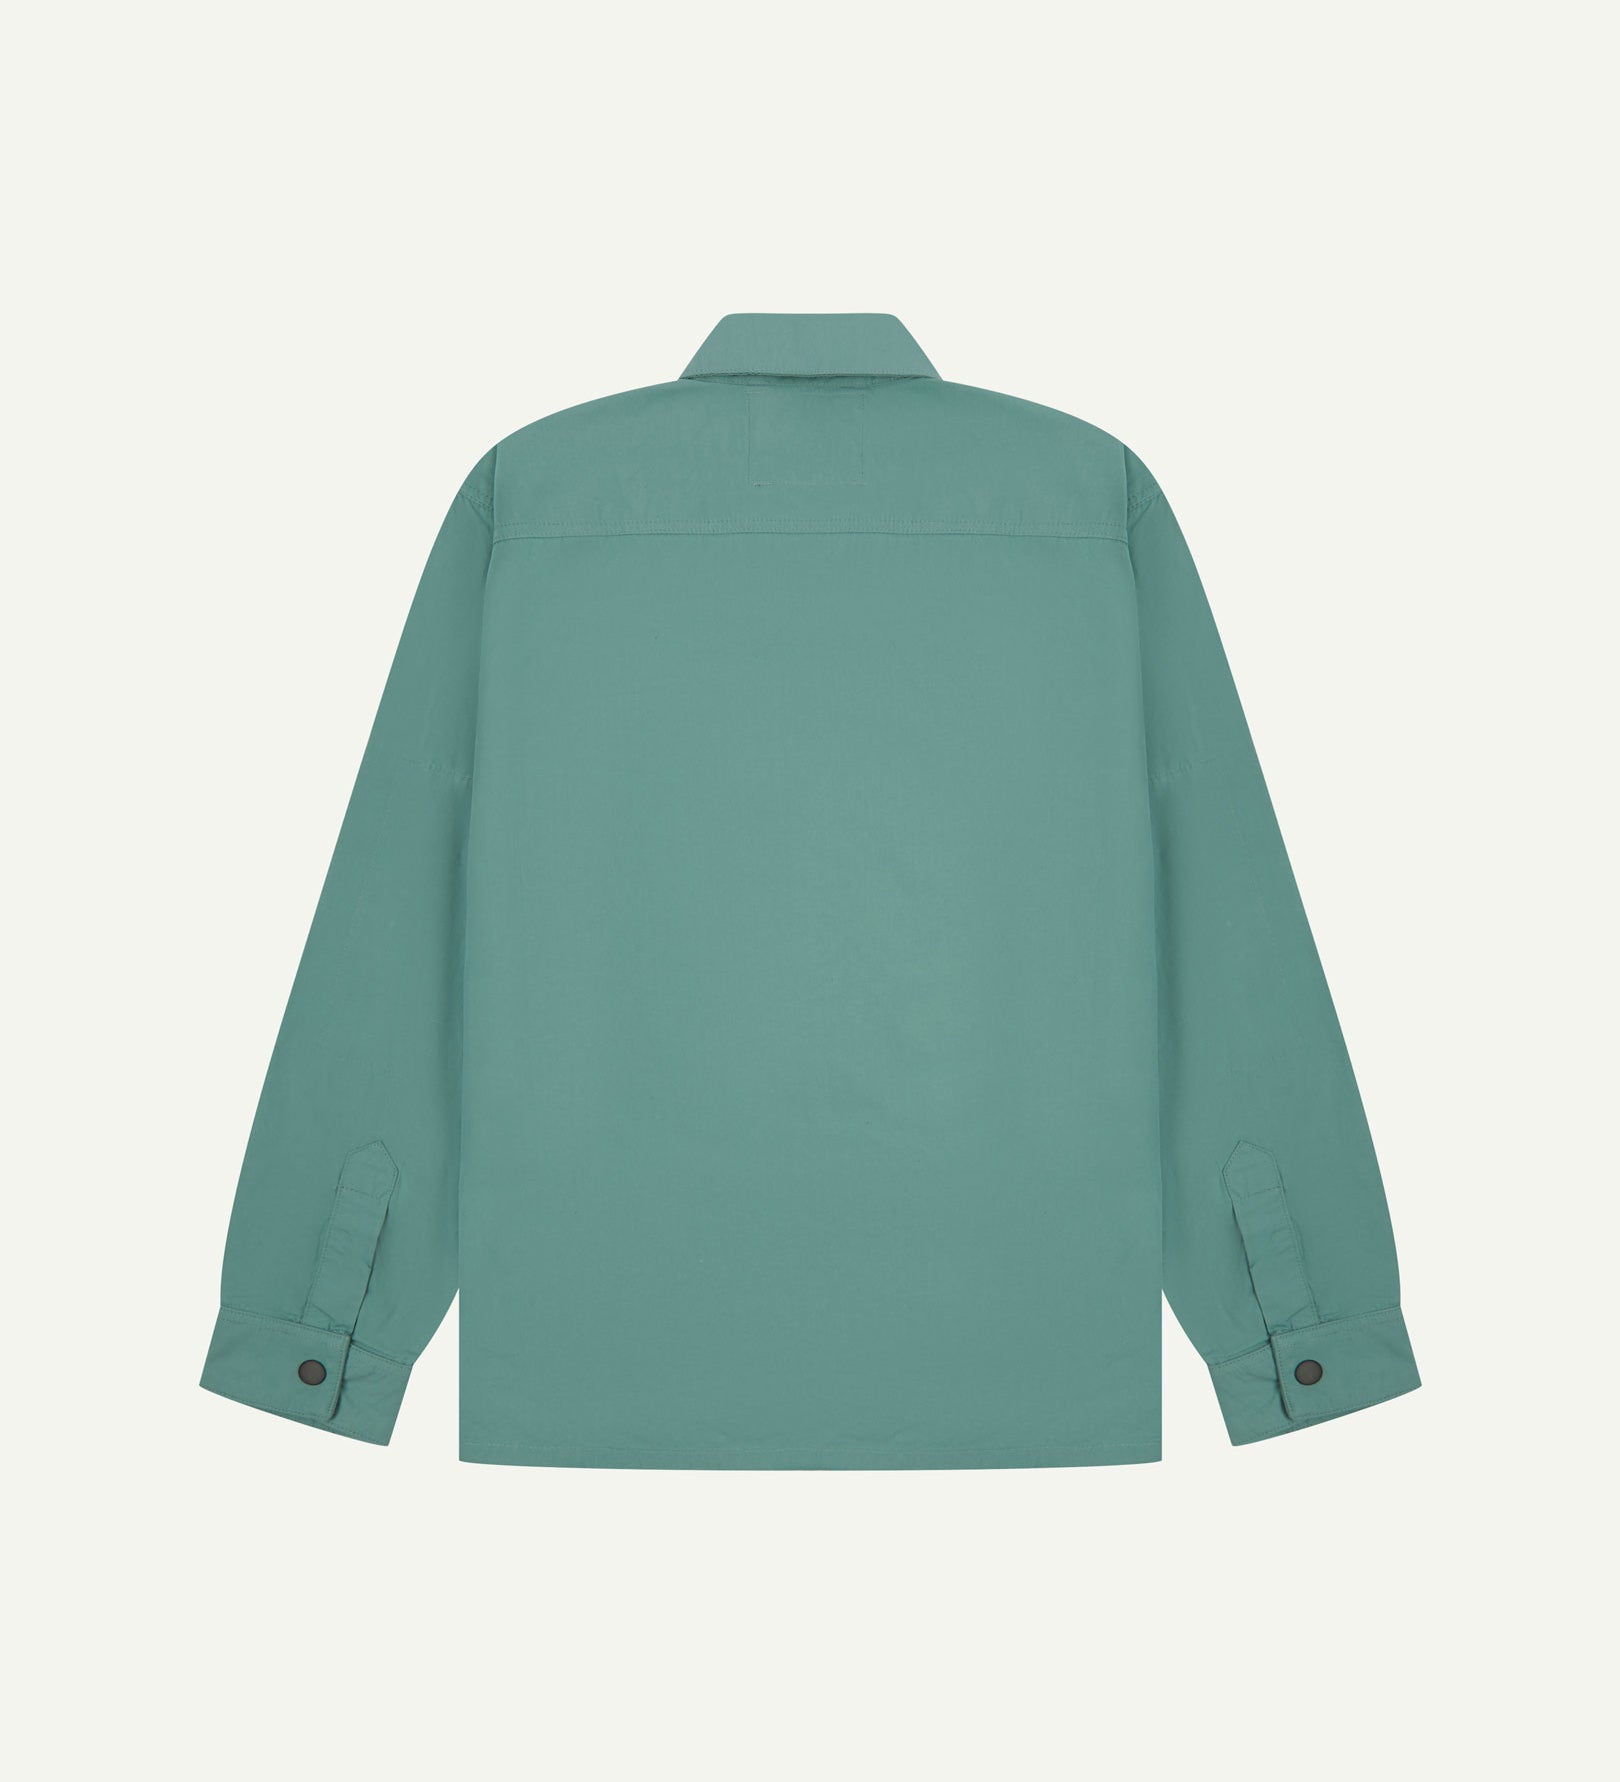 Reverse view of blue-green eucalyptus, lightweight overshirt showing reinforced elbows, boxy silhouette and 'popper' cuffs.